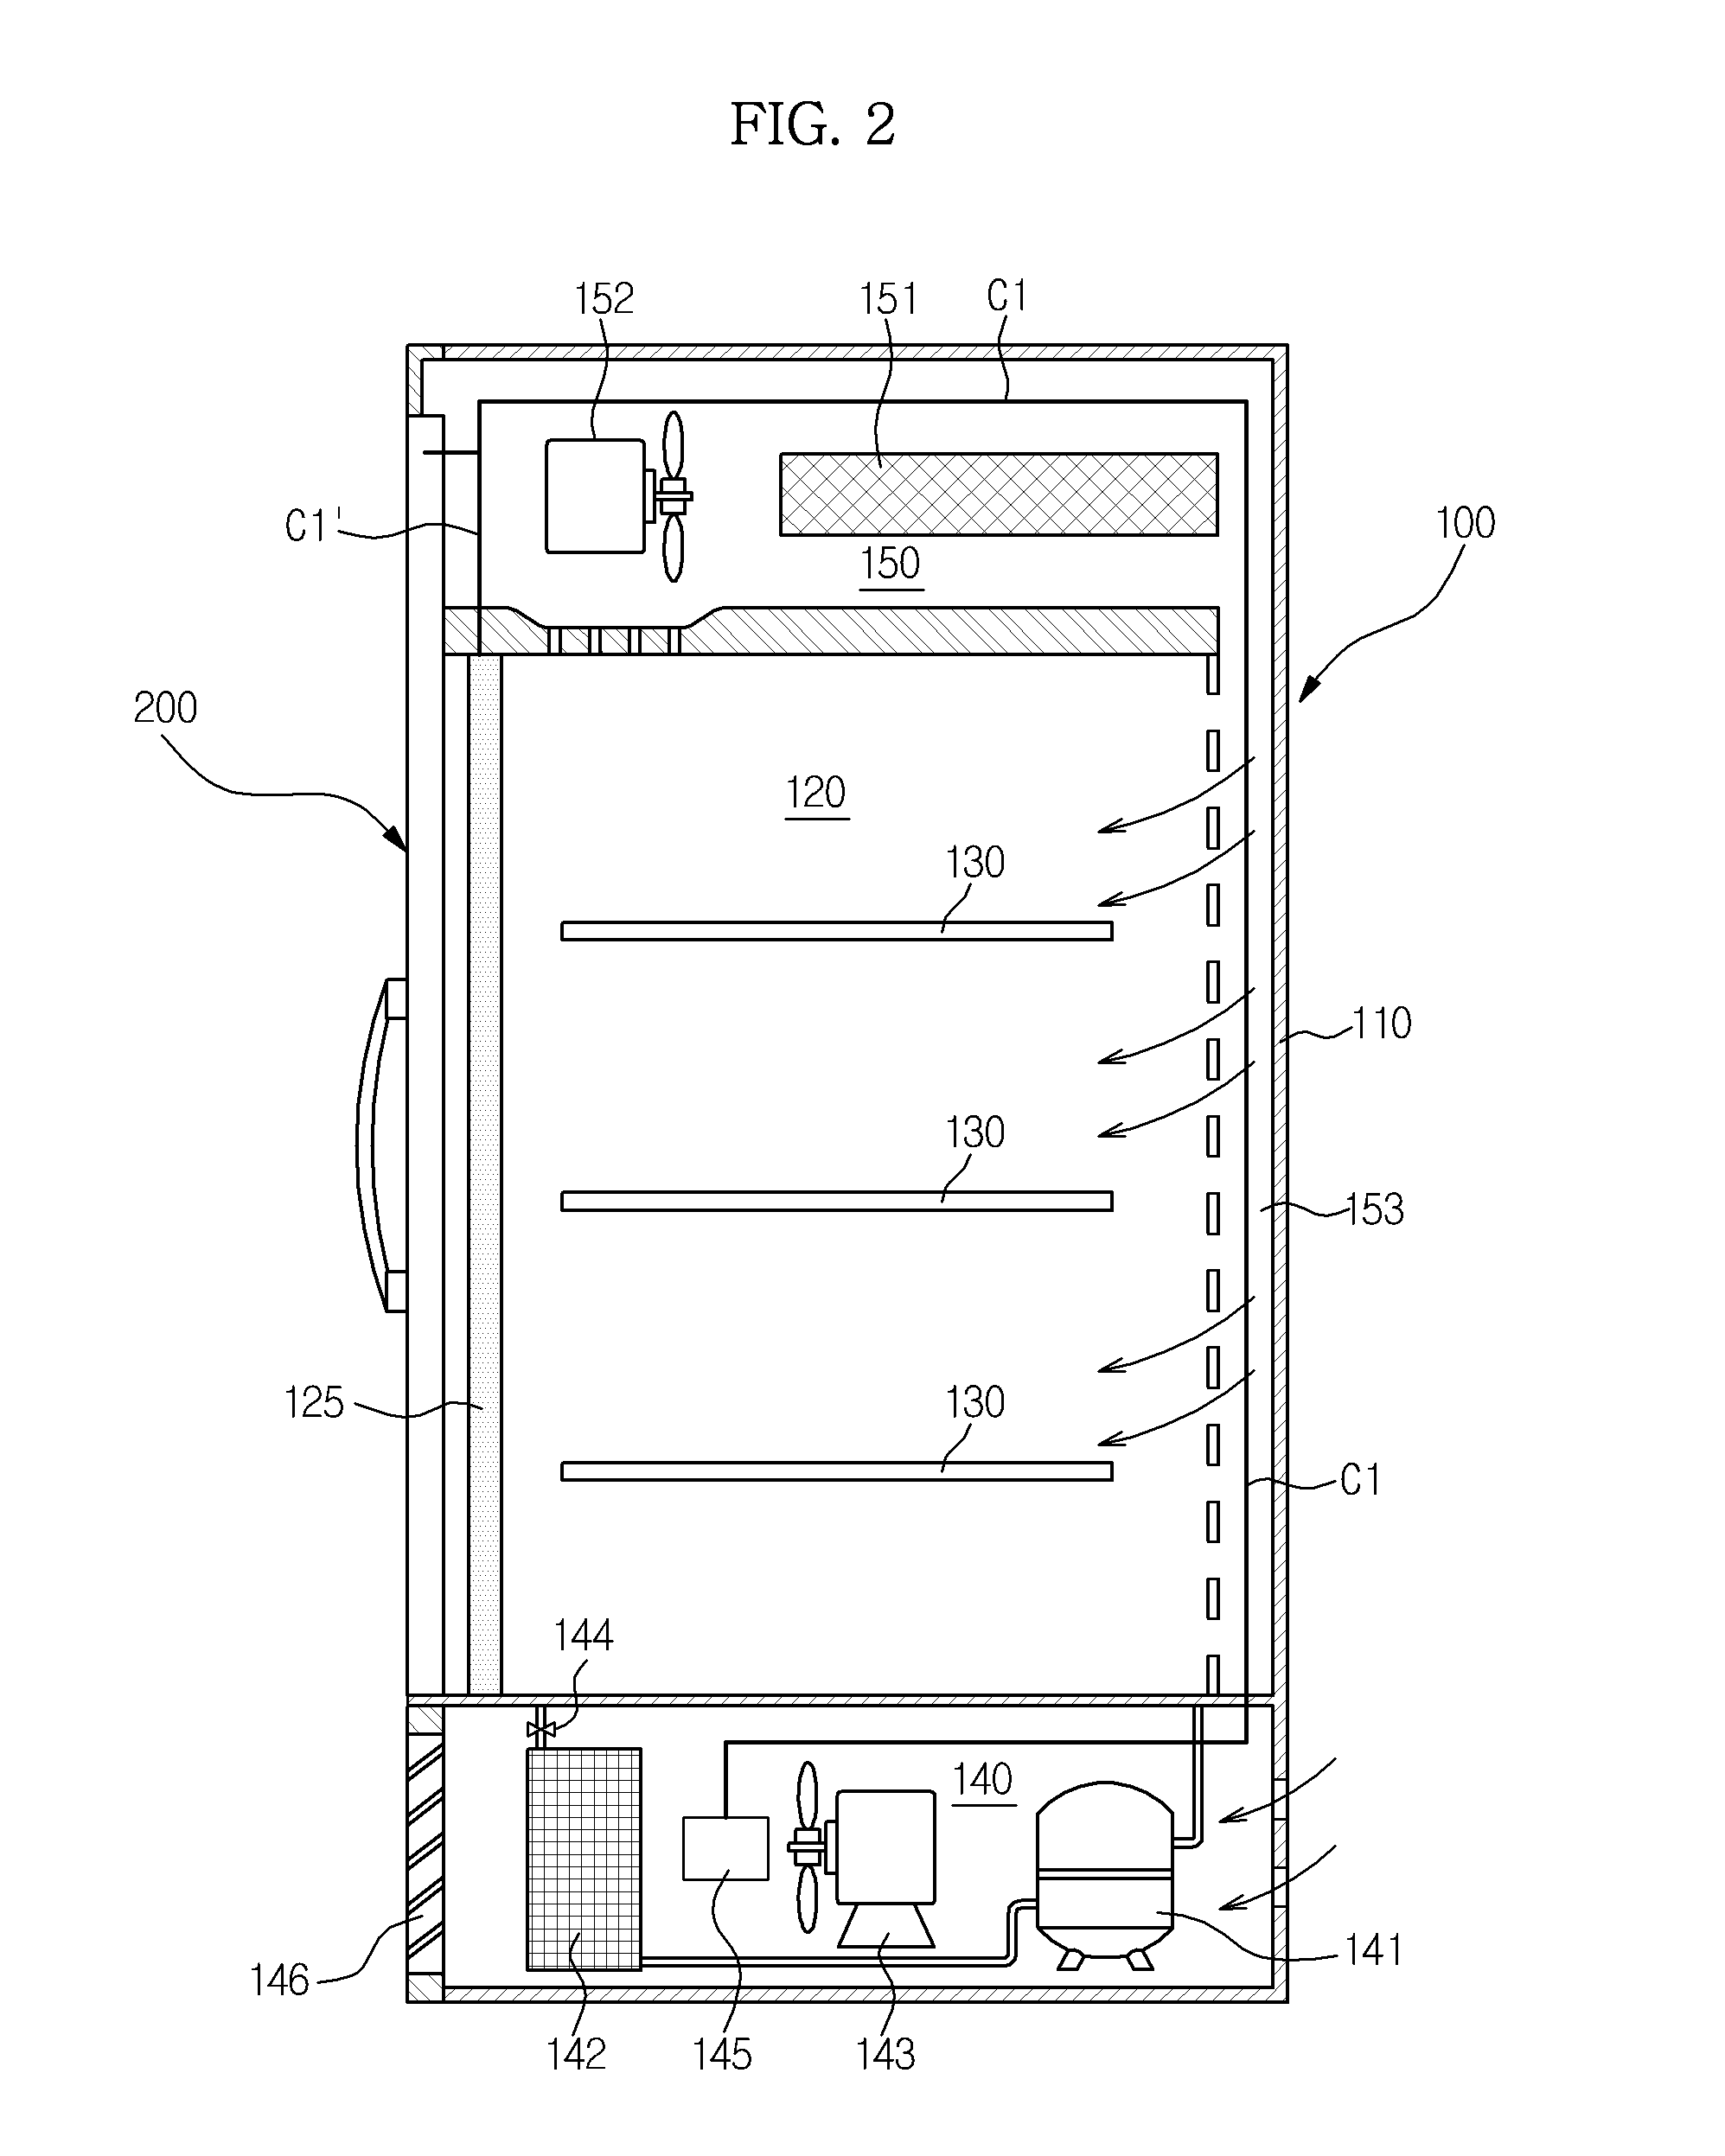 Display module and display system